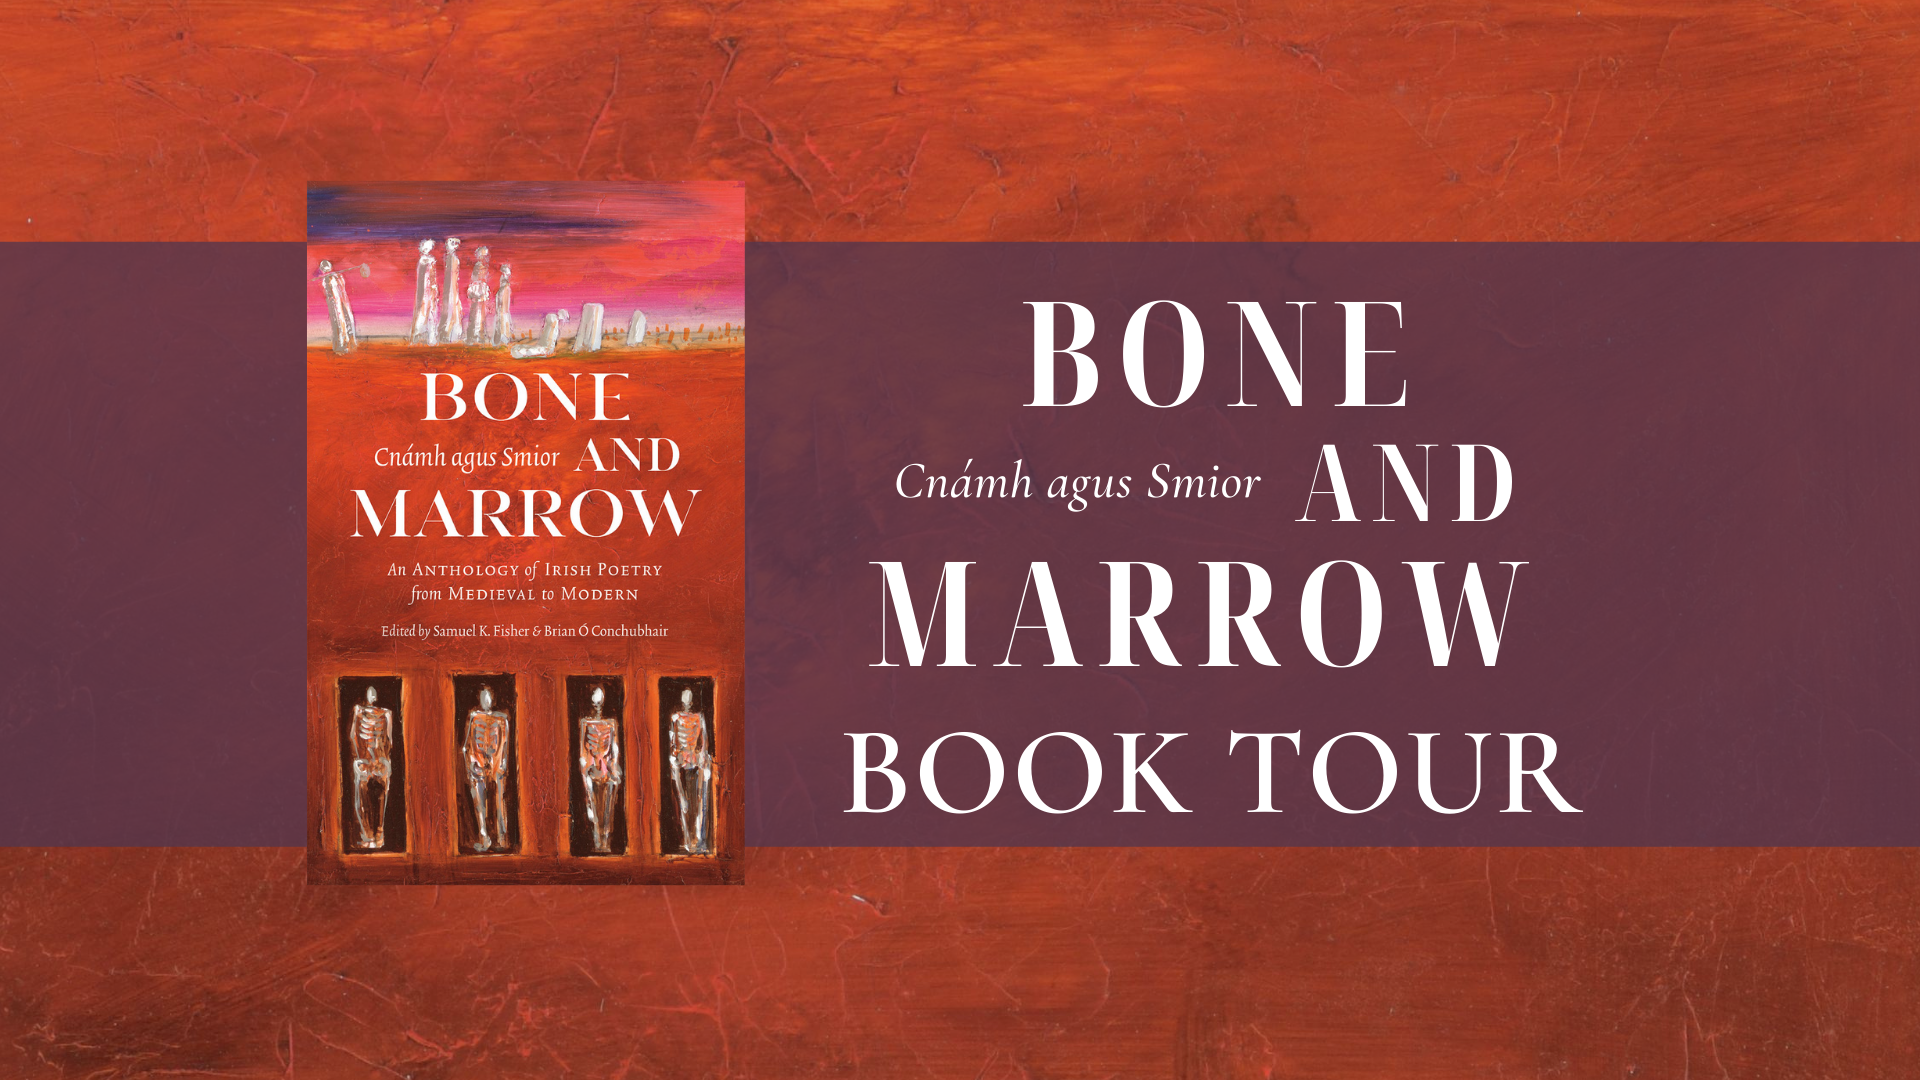 header image for the Bone and Marrow Book Tour